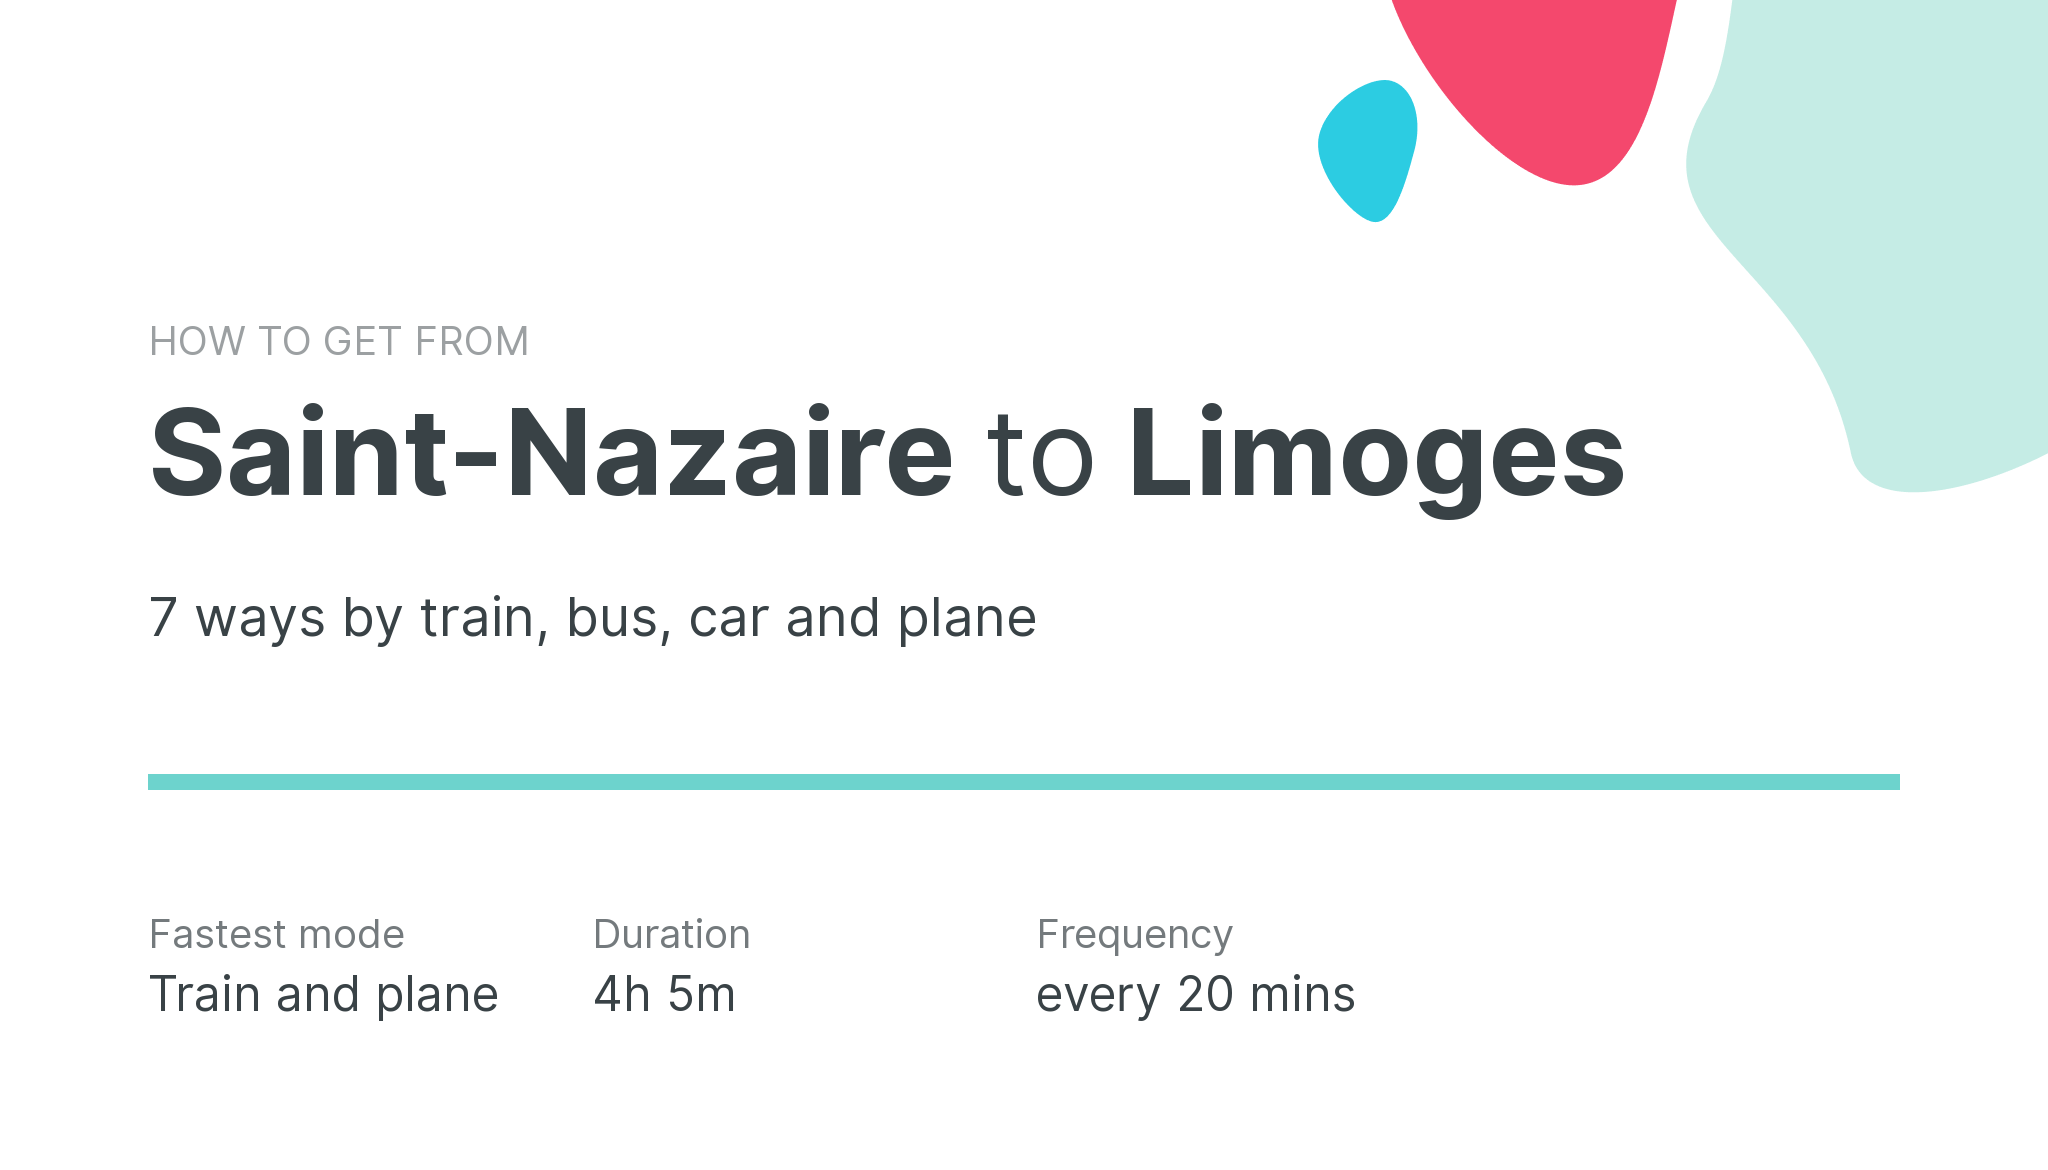 How do I get from Saint-Nazaire to Limoges